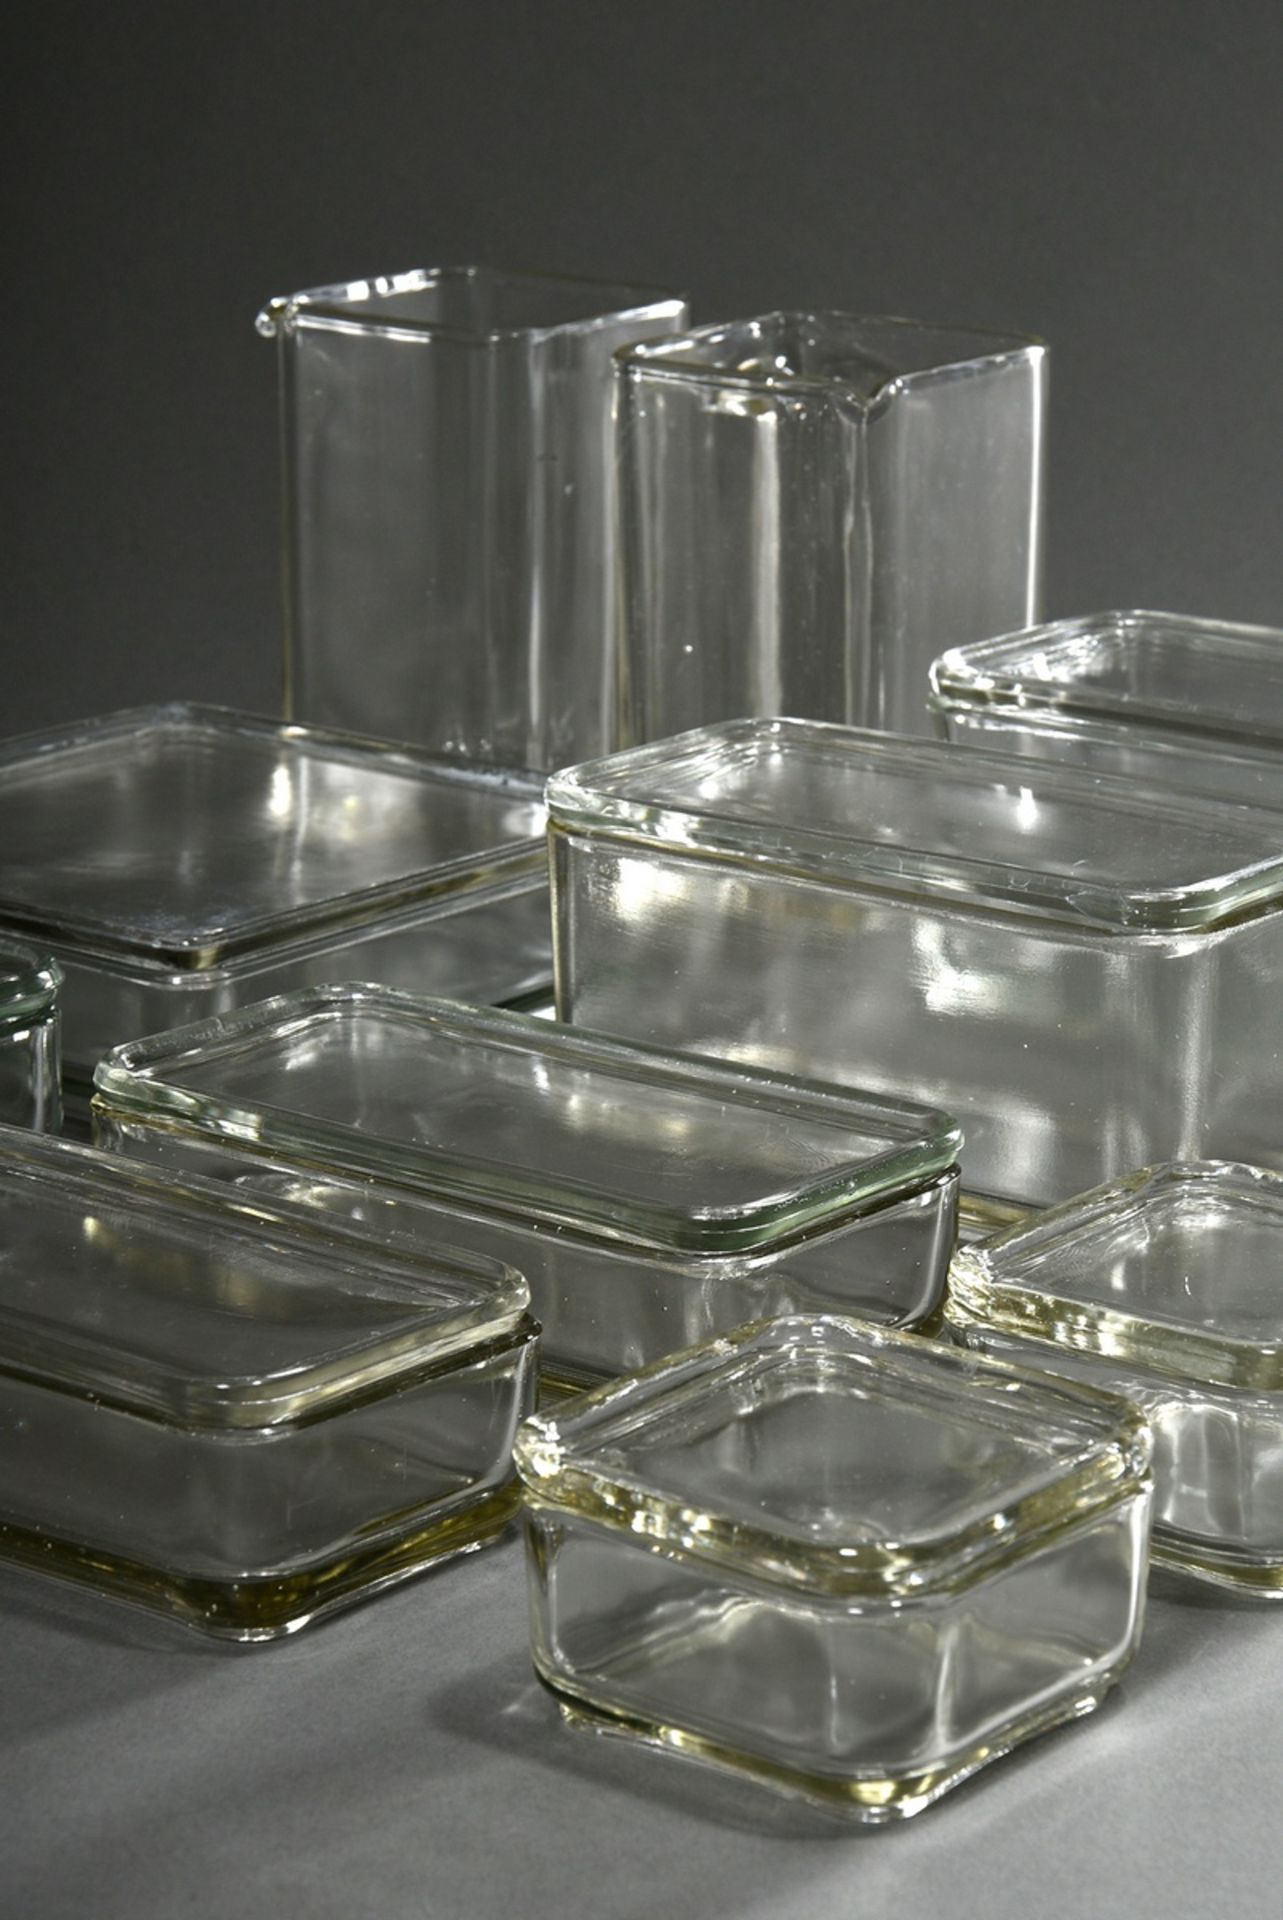 12 Stackable storage jars from the "Kubus-Geschirr", 7 with lid, colourless pressed glass, design: